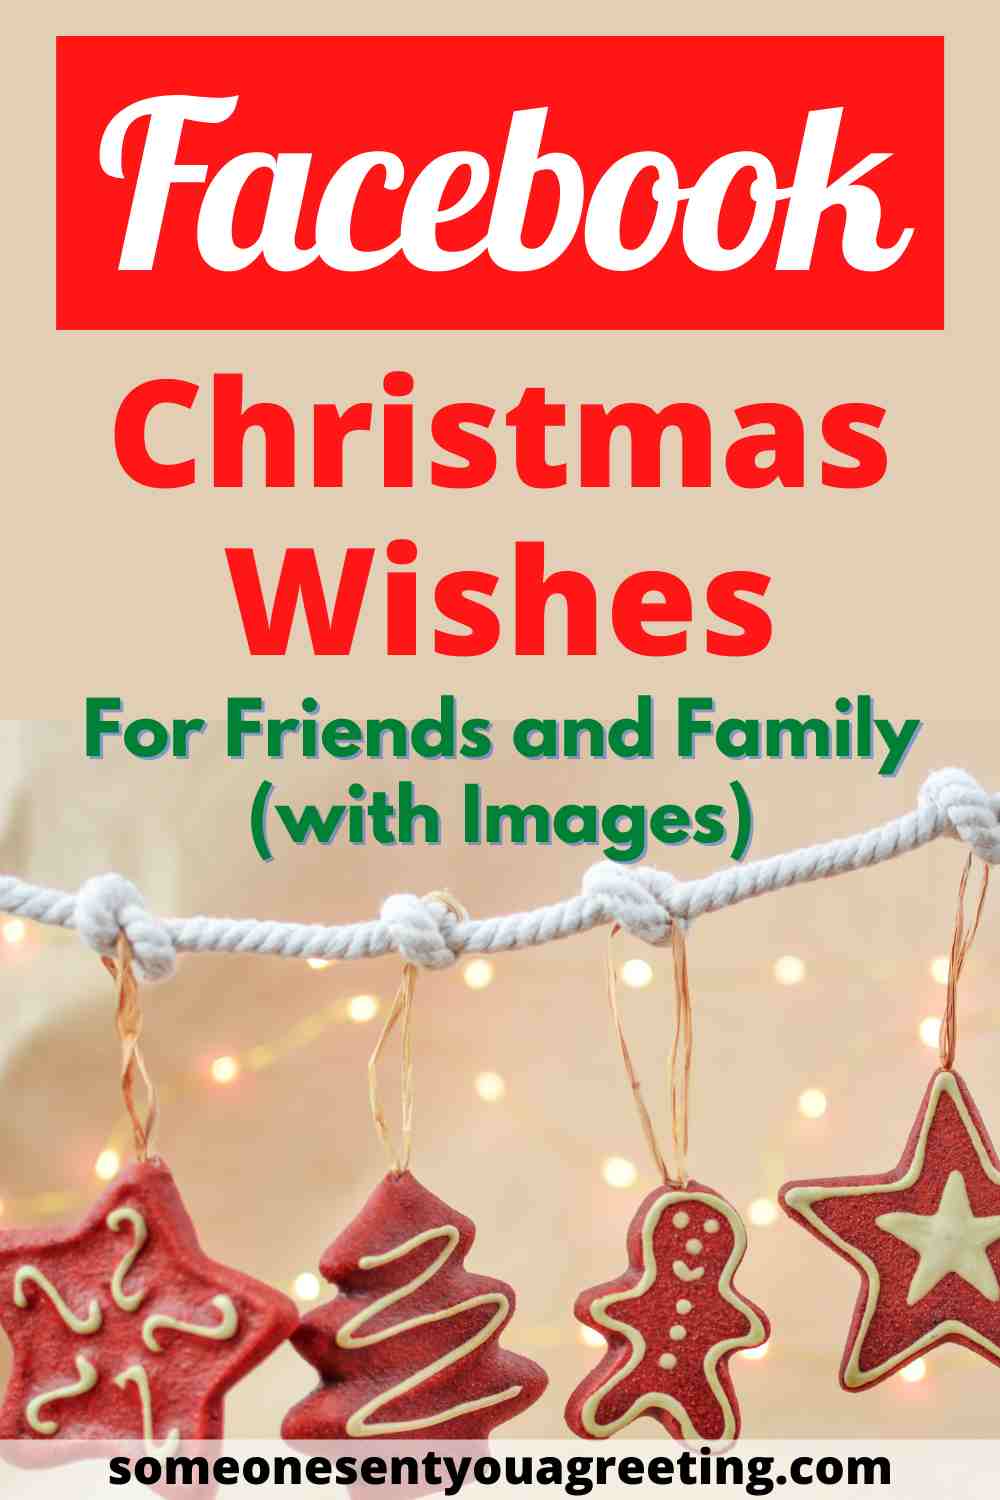 Christmas wishes for Facebook